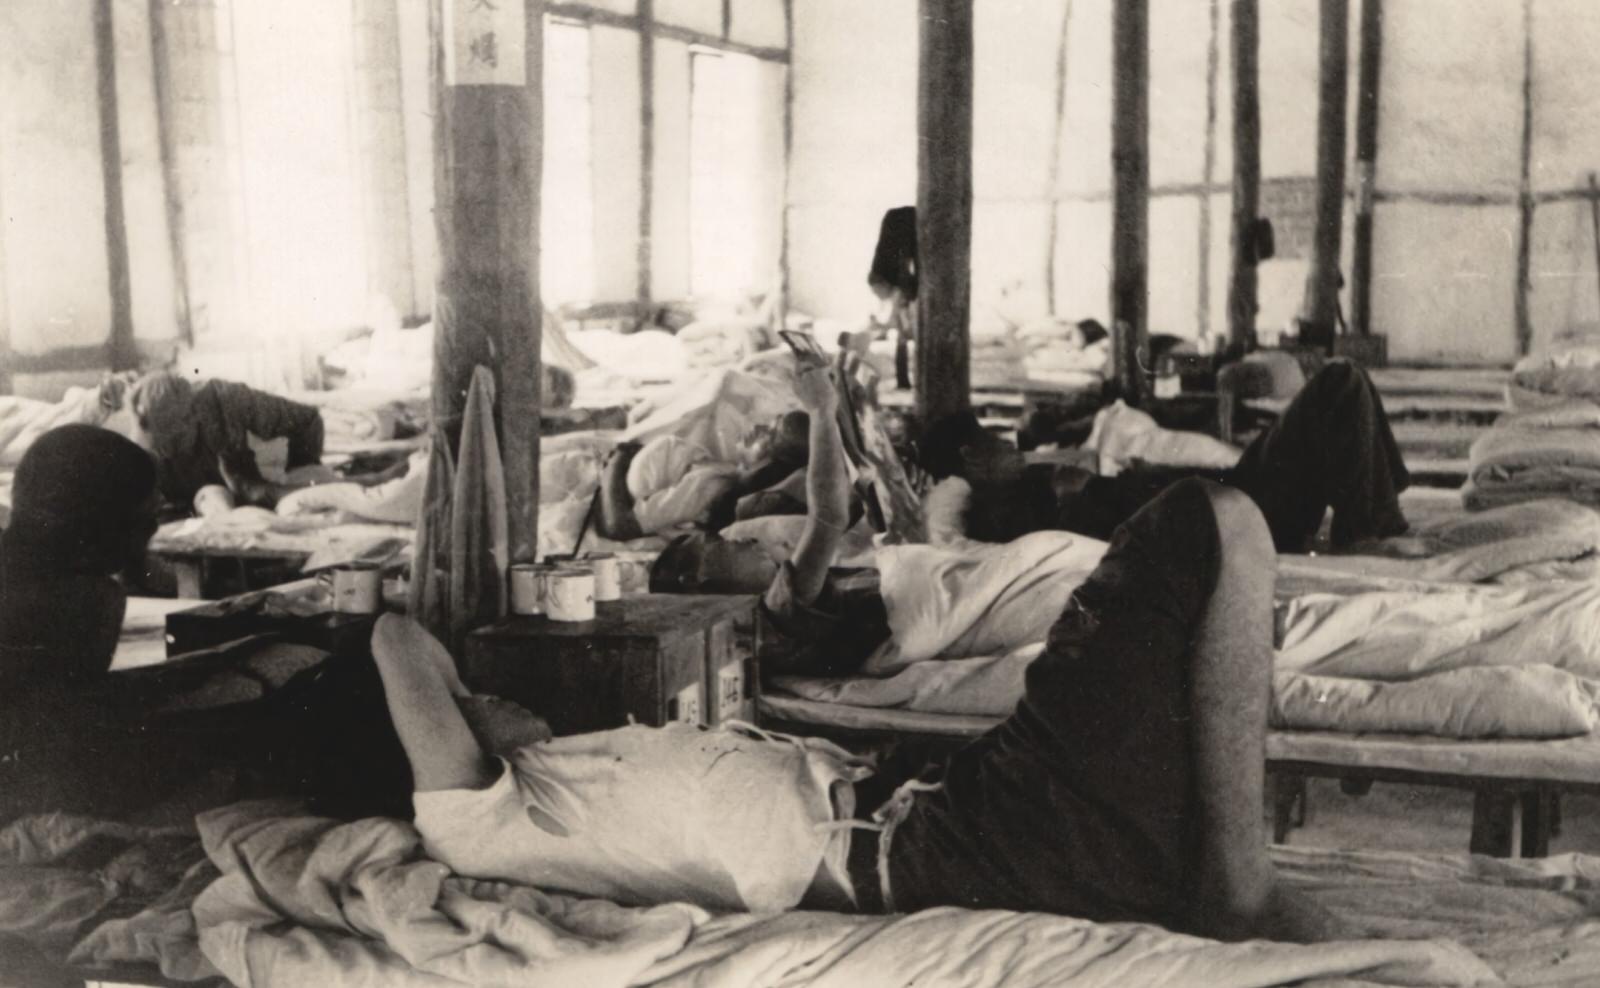 Training Hospital of the Chinese Red Cross Medical Corps at Kweiyang, 1937-1940